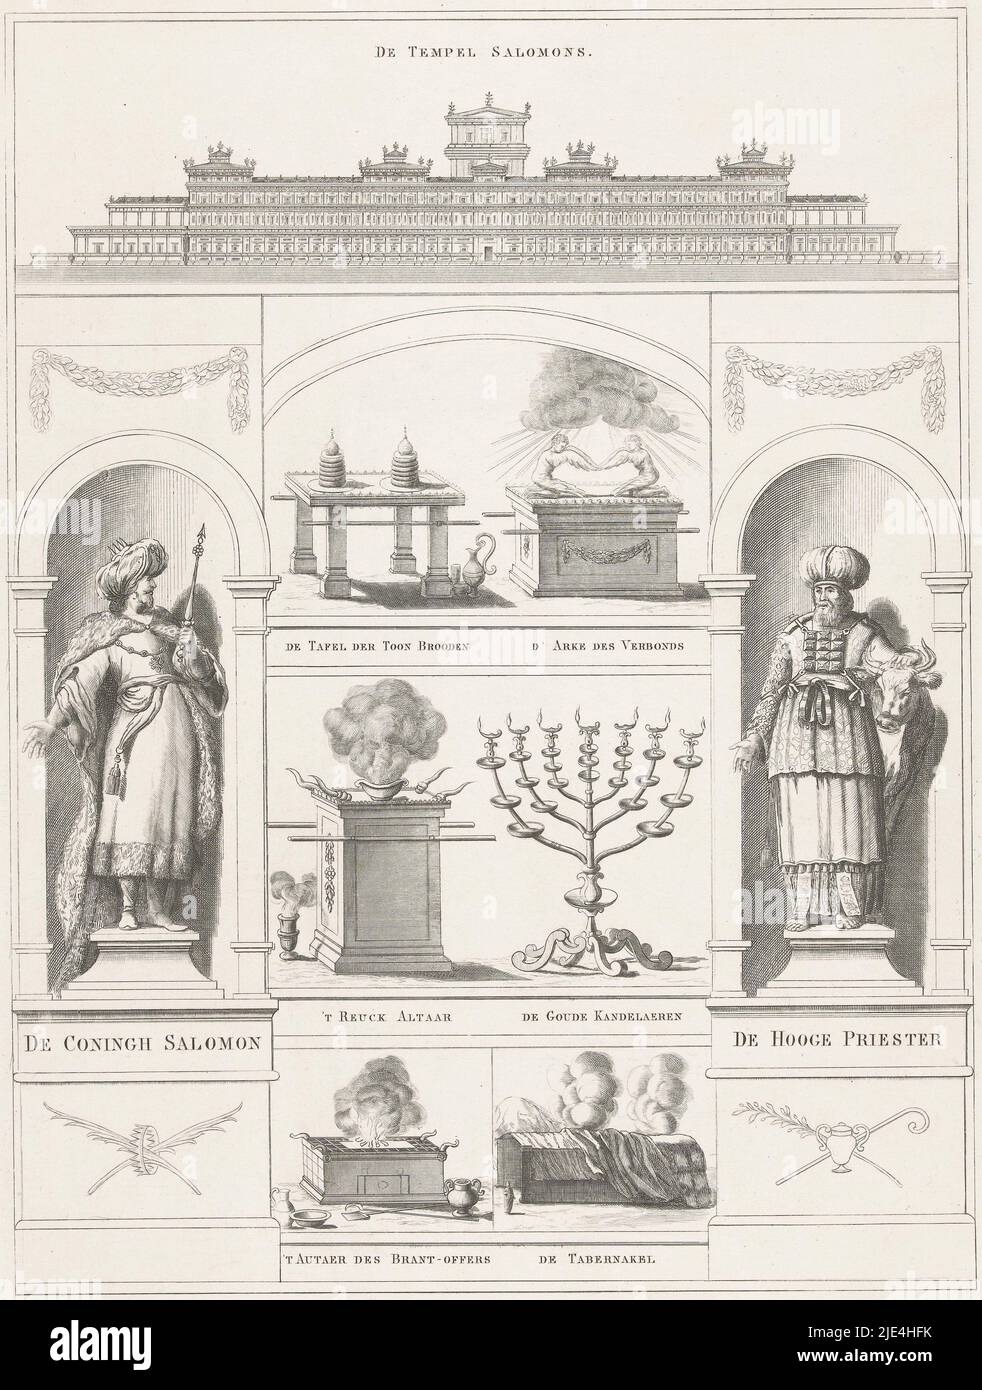 The Temple of Solomon, King Solomon, the High Priest and six objects from the temple, Petrus Johannes Arendzen, 1864, The Temple of Solomon, below the building two statues of King Solomon and the High Priest with an ox. In the center six objects from the temple: the table of showbread, the Ark of the Covenant, the altar of incense, the golden candlestick, the altar of burnt offering and the tabernacle., print maker: Petrus Johannes Arendzen, (mentioned on object), publisher: S. van Velzen jr., (mentioned on object), print maker: Netherlands, publisher: Kampen, 1864, paper, etching, engraving Stock Photo